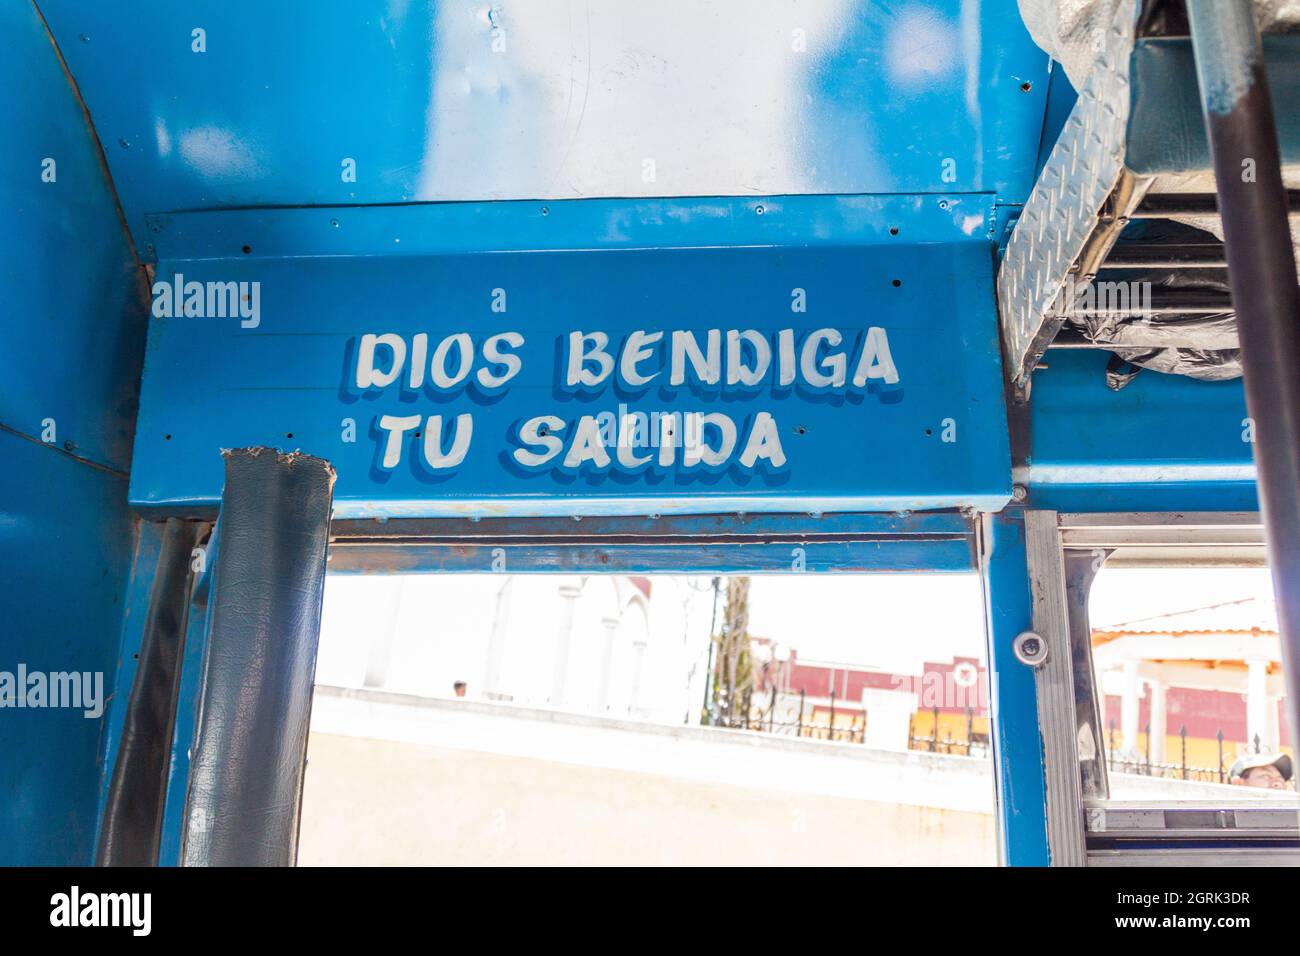 SAN MATEO IXTATAN, GUATEMALA, MARCH 19, 2016: Door of a local bus in Guatemala. Text says: God bless your getting off. Stock Photo